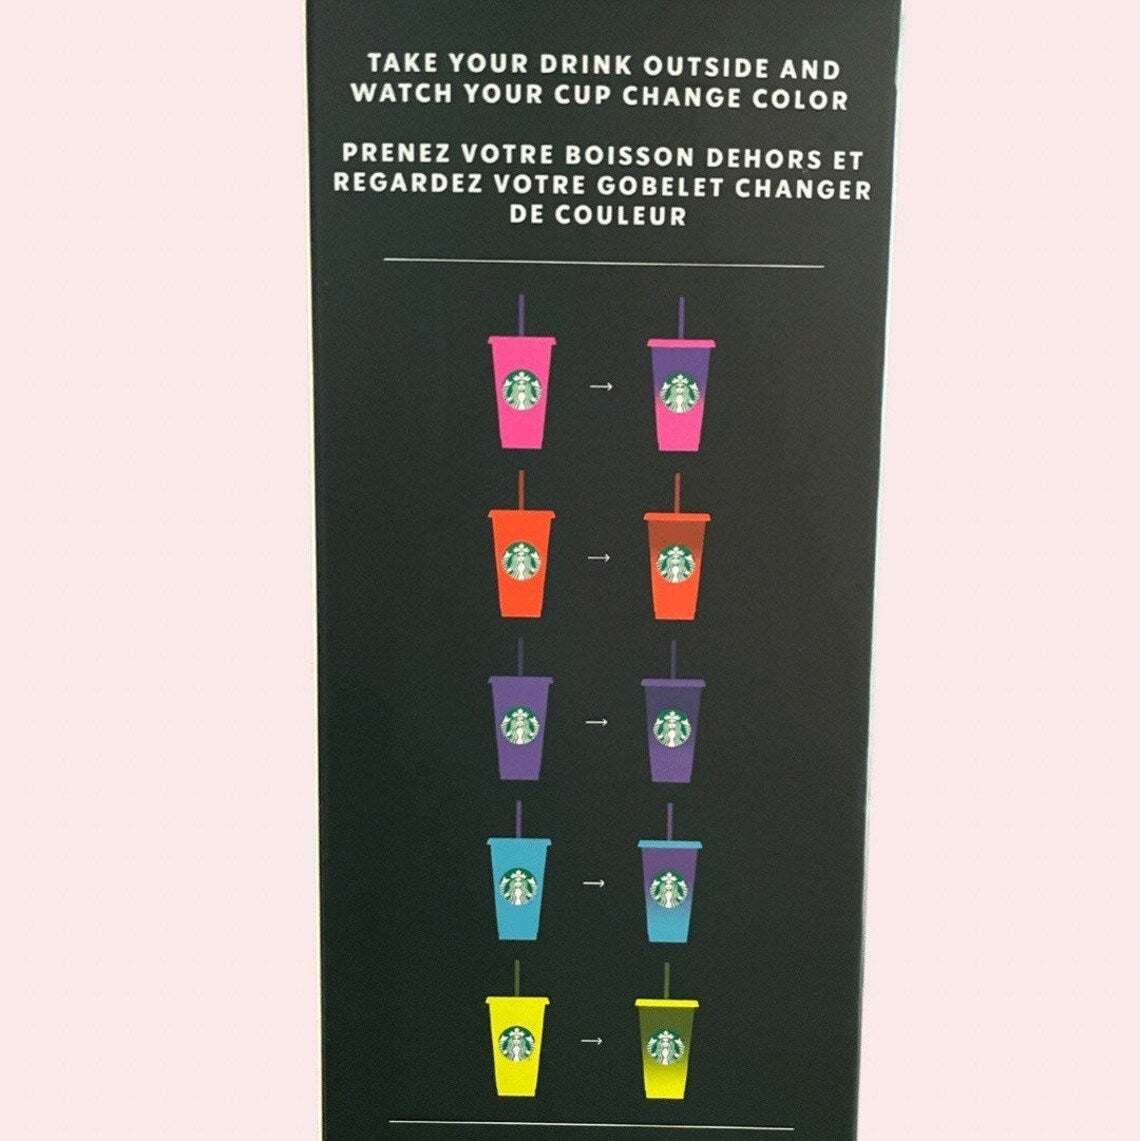 Starbucks Color-Changing Cup Sales Boom in Resale Market